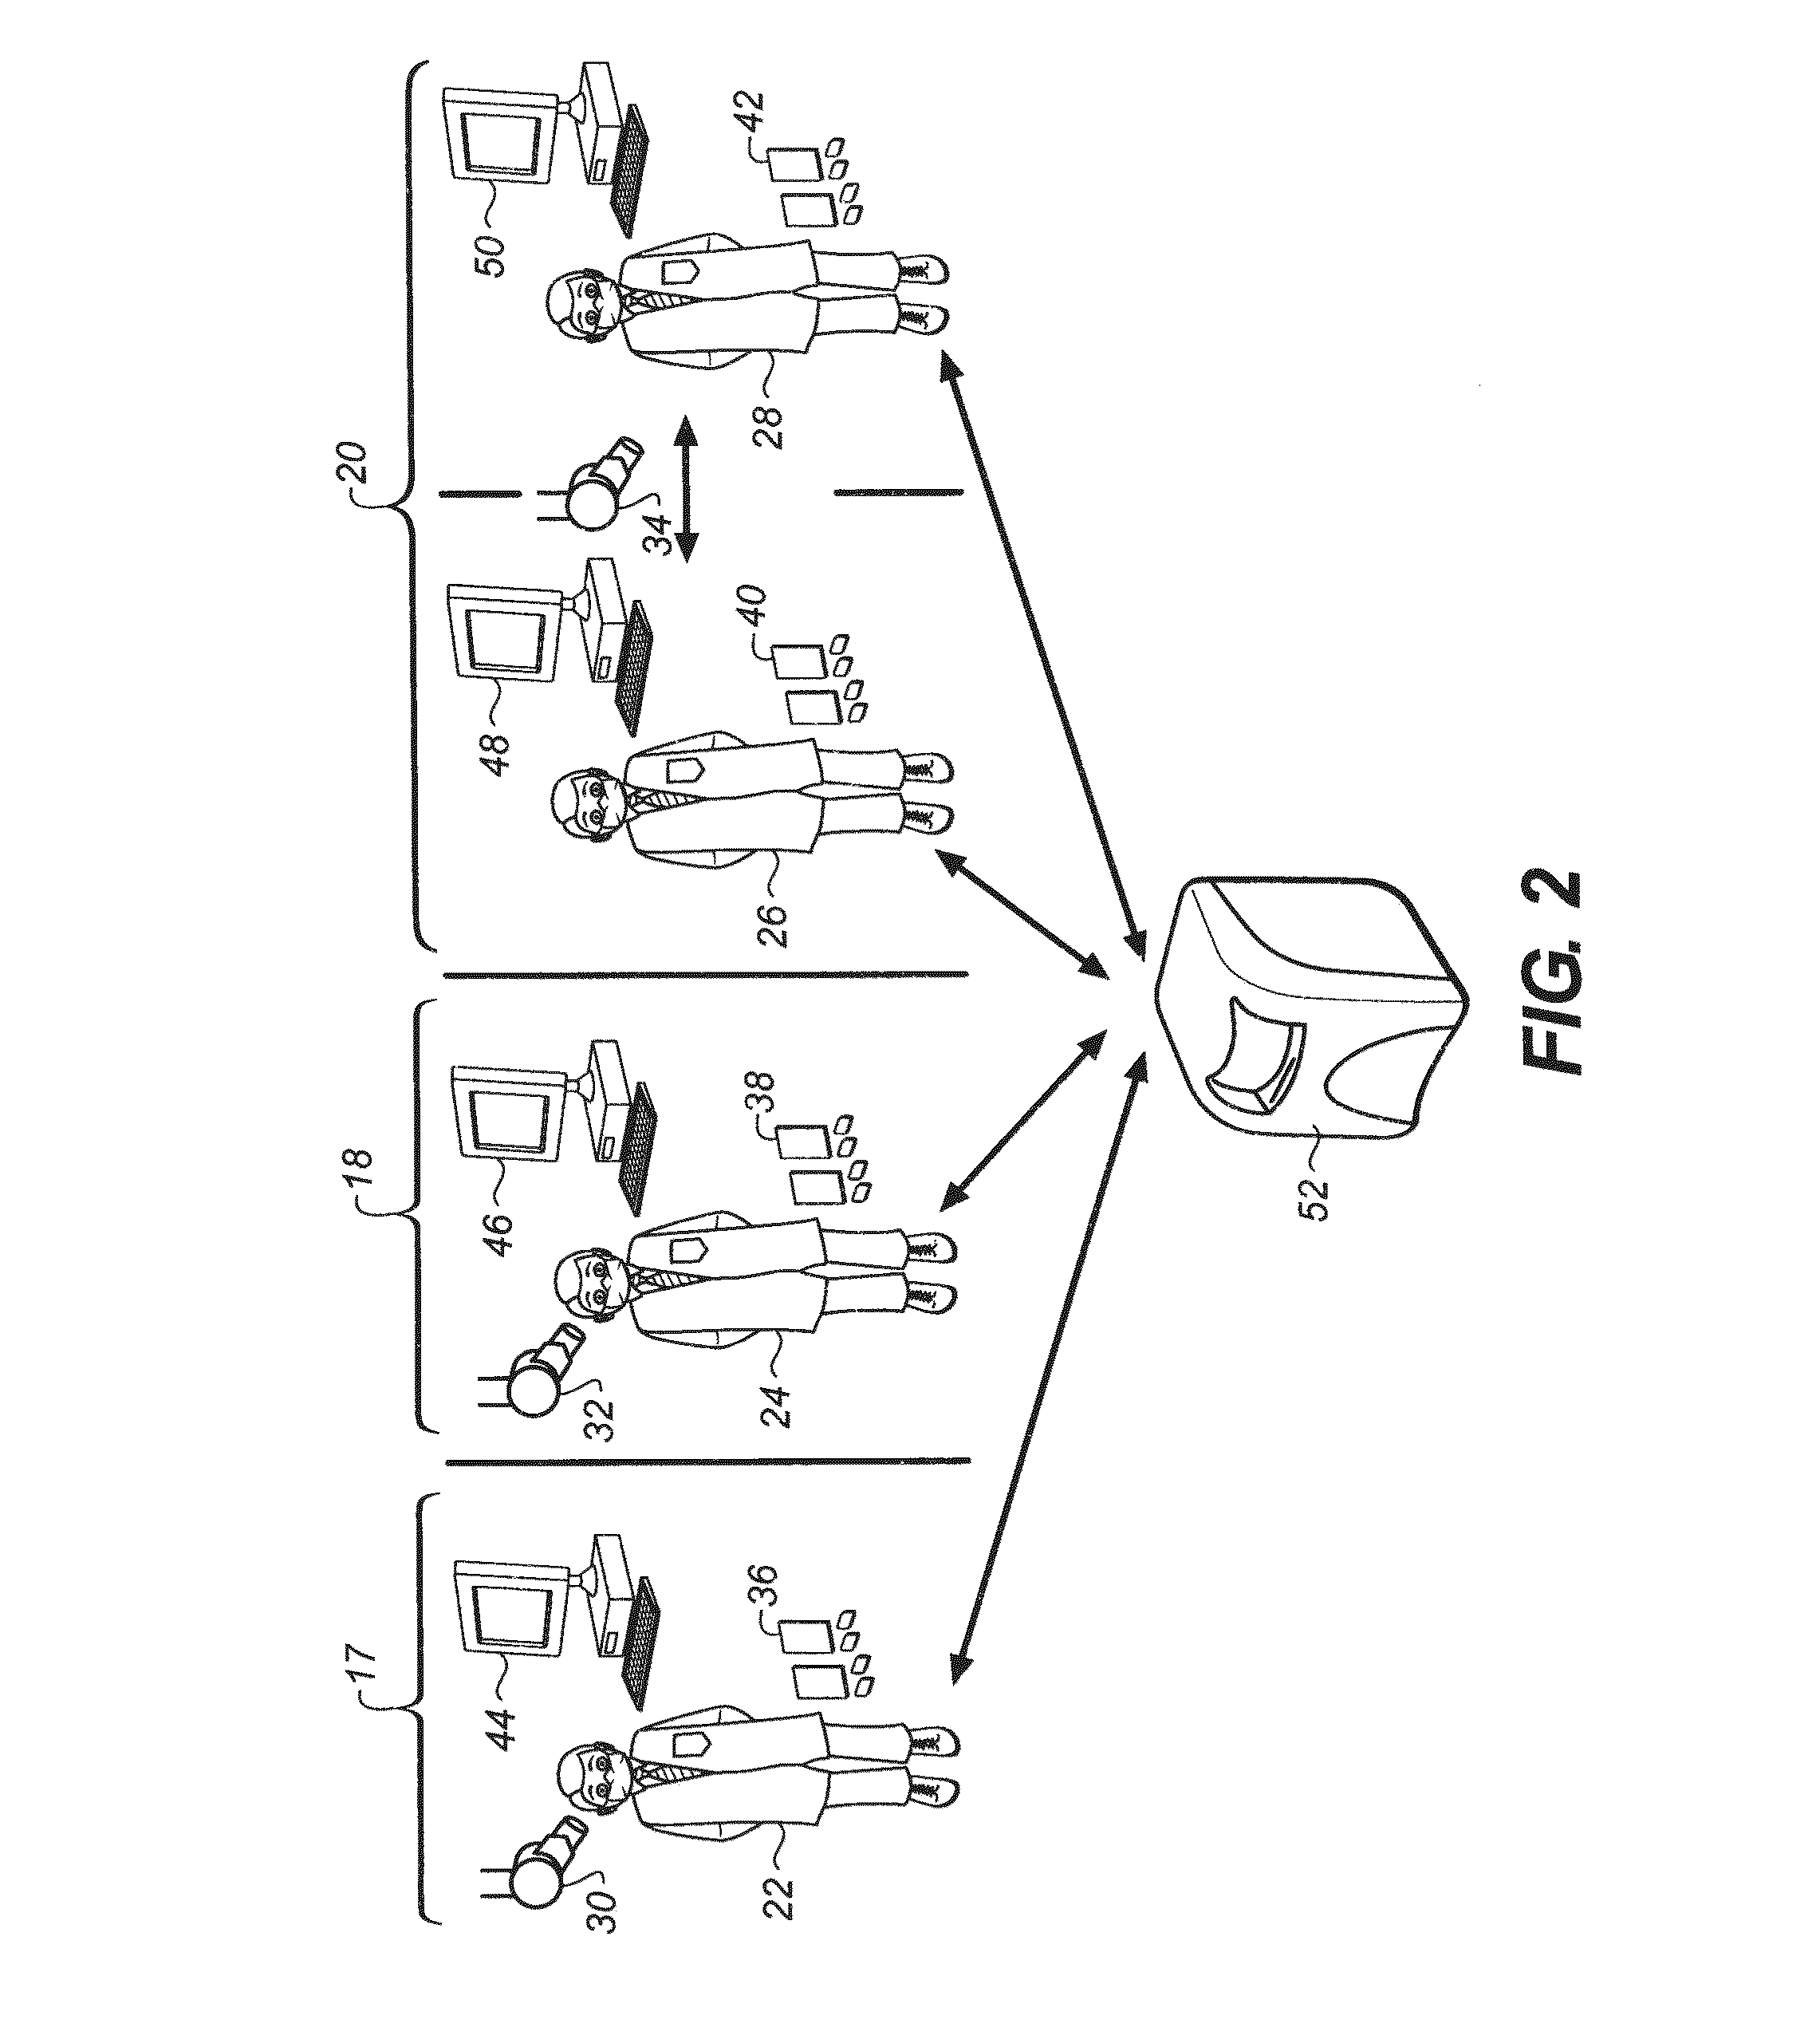 Method and system for phosphor plate identification in computed radiography